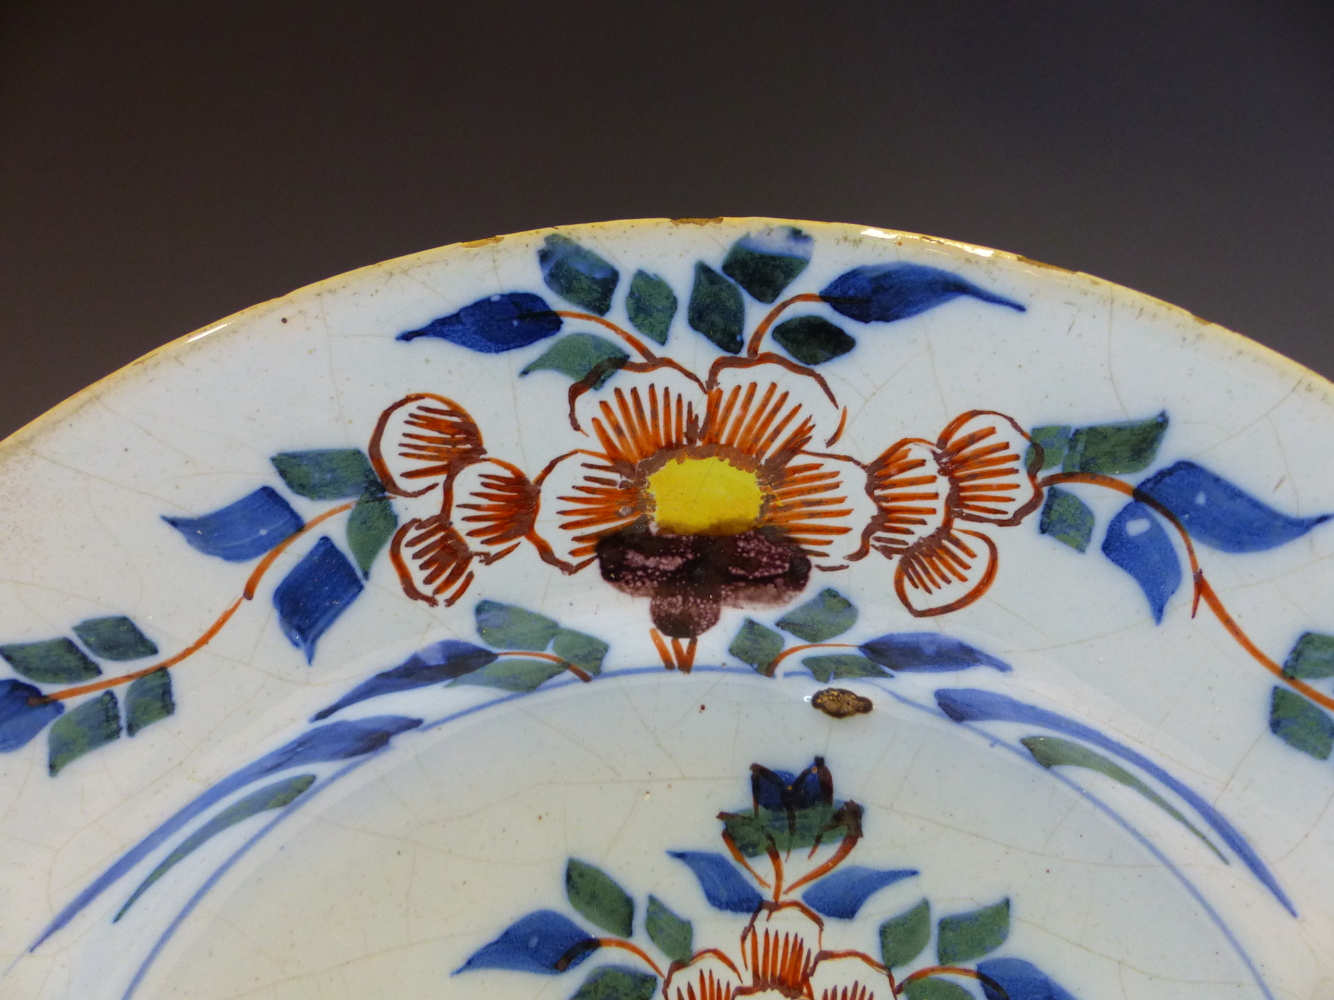 A PAIR OF 18th C. ENGLISH DELFT POLYCHROME PLATES PAINTED WITH YELLOW CENTRED RED FLOWERS WITHIN - Image 6 of 10